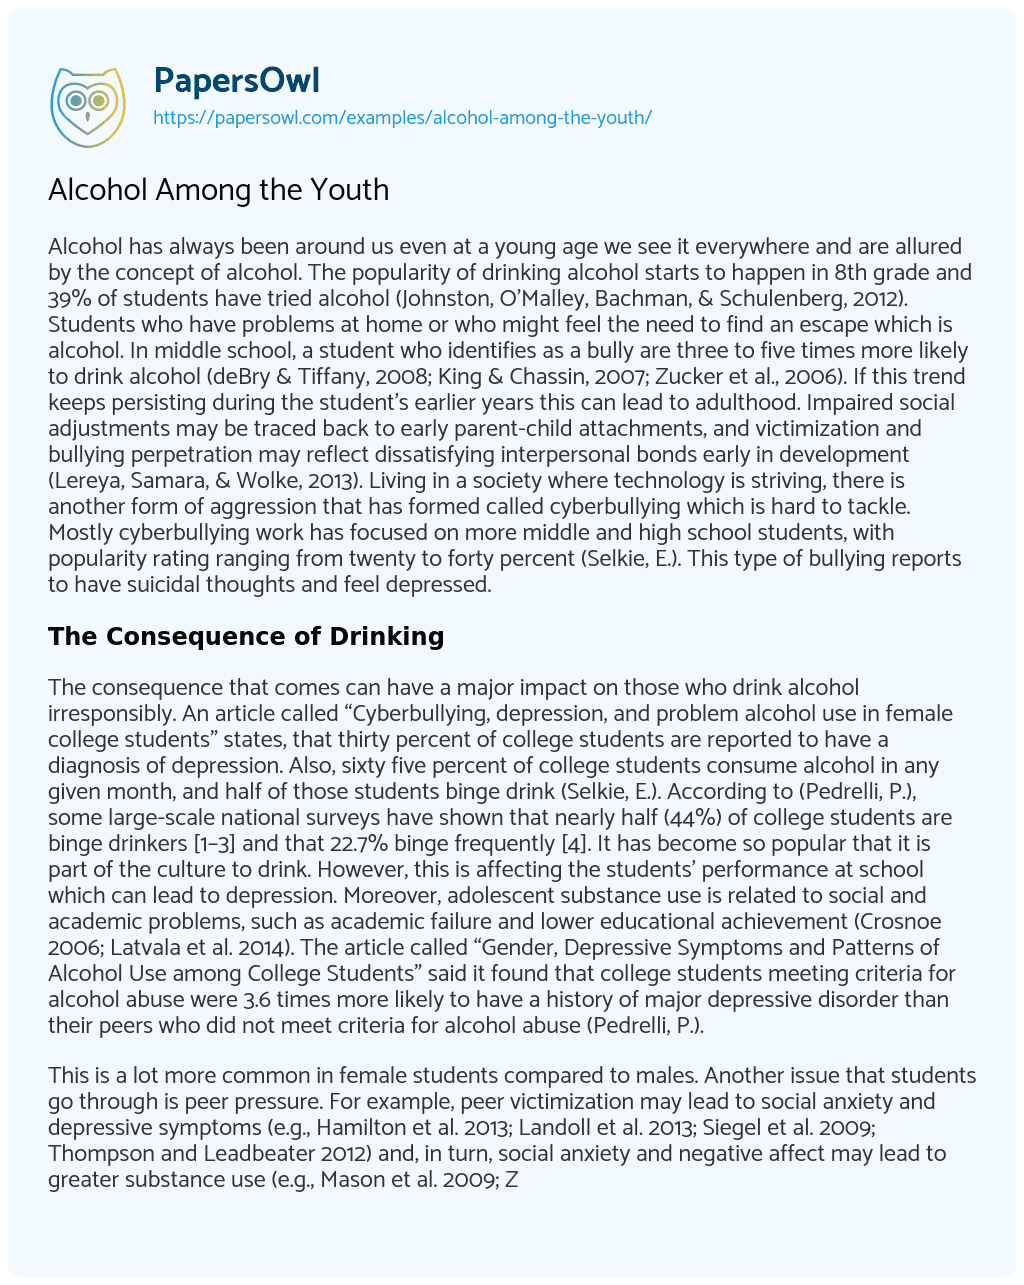 Essay on Alcohol Among the Youth